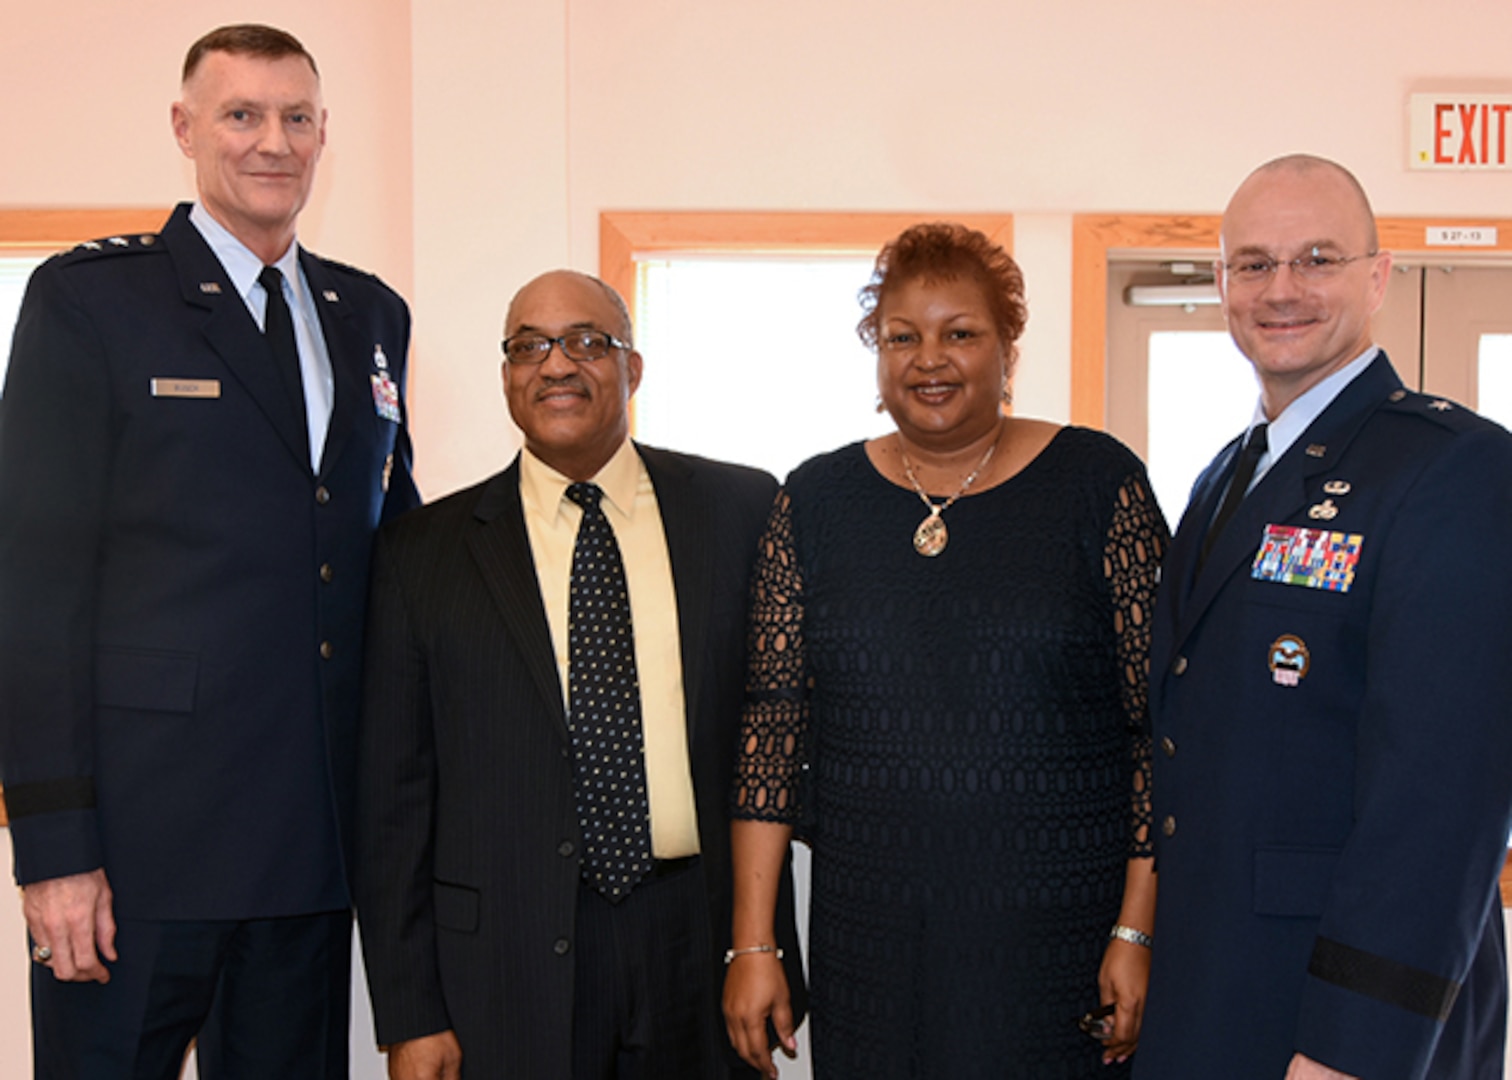 DLA Aviation's Secretary to the Commander Annette Fryar, center right, retired after 27 years of federal service, in Richmond, Virginia on Feb. 5, 2016 in a ceremony held at the Community Center on Defense Supply Center Richmond. Fryar is accompanied by her husband Charles Fryar, center left, DLA Director  Air Force Lt. Gen. Andy Busch, left, who retired Fryar at the ceremony, and DLA Aviation Commander Allan Day, right.